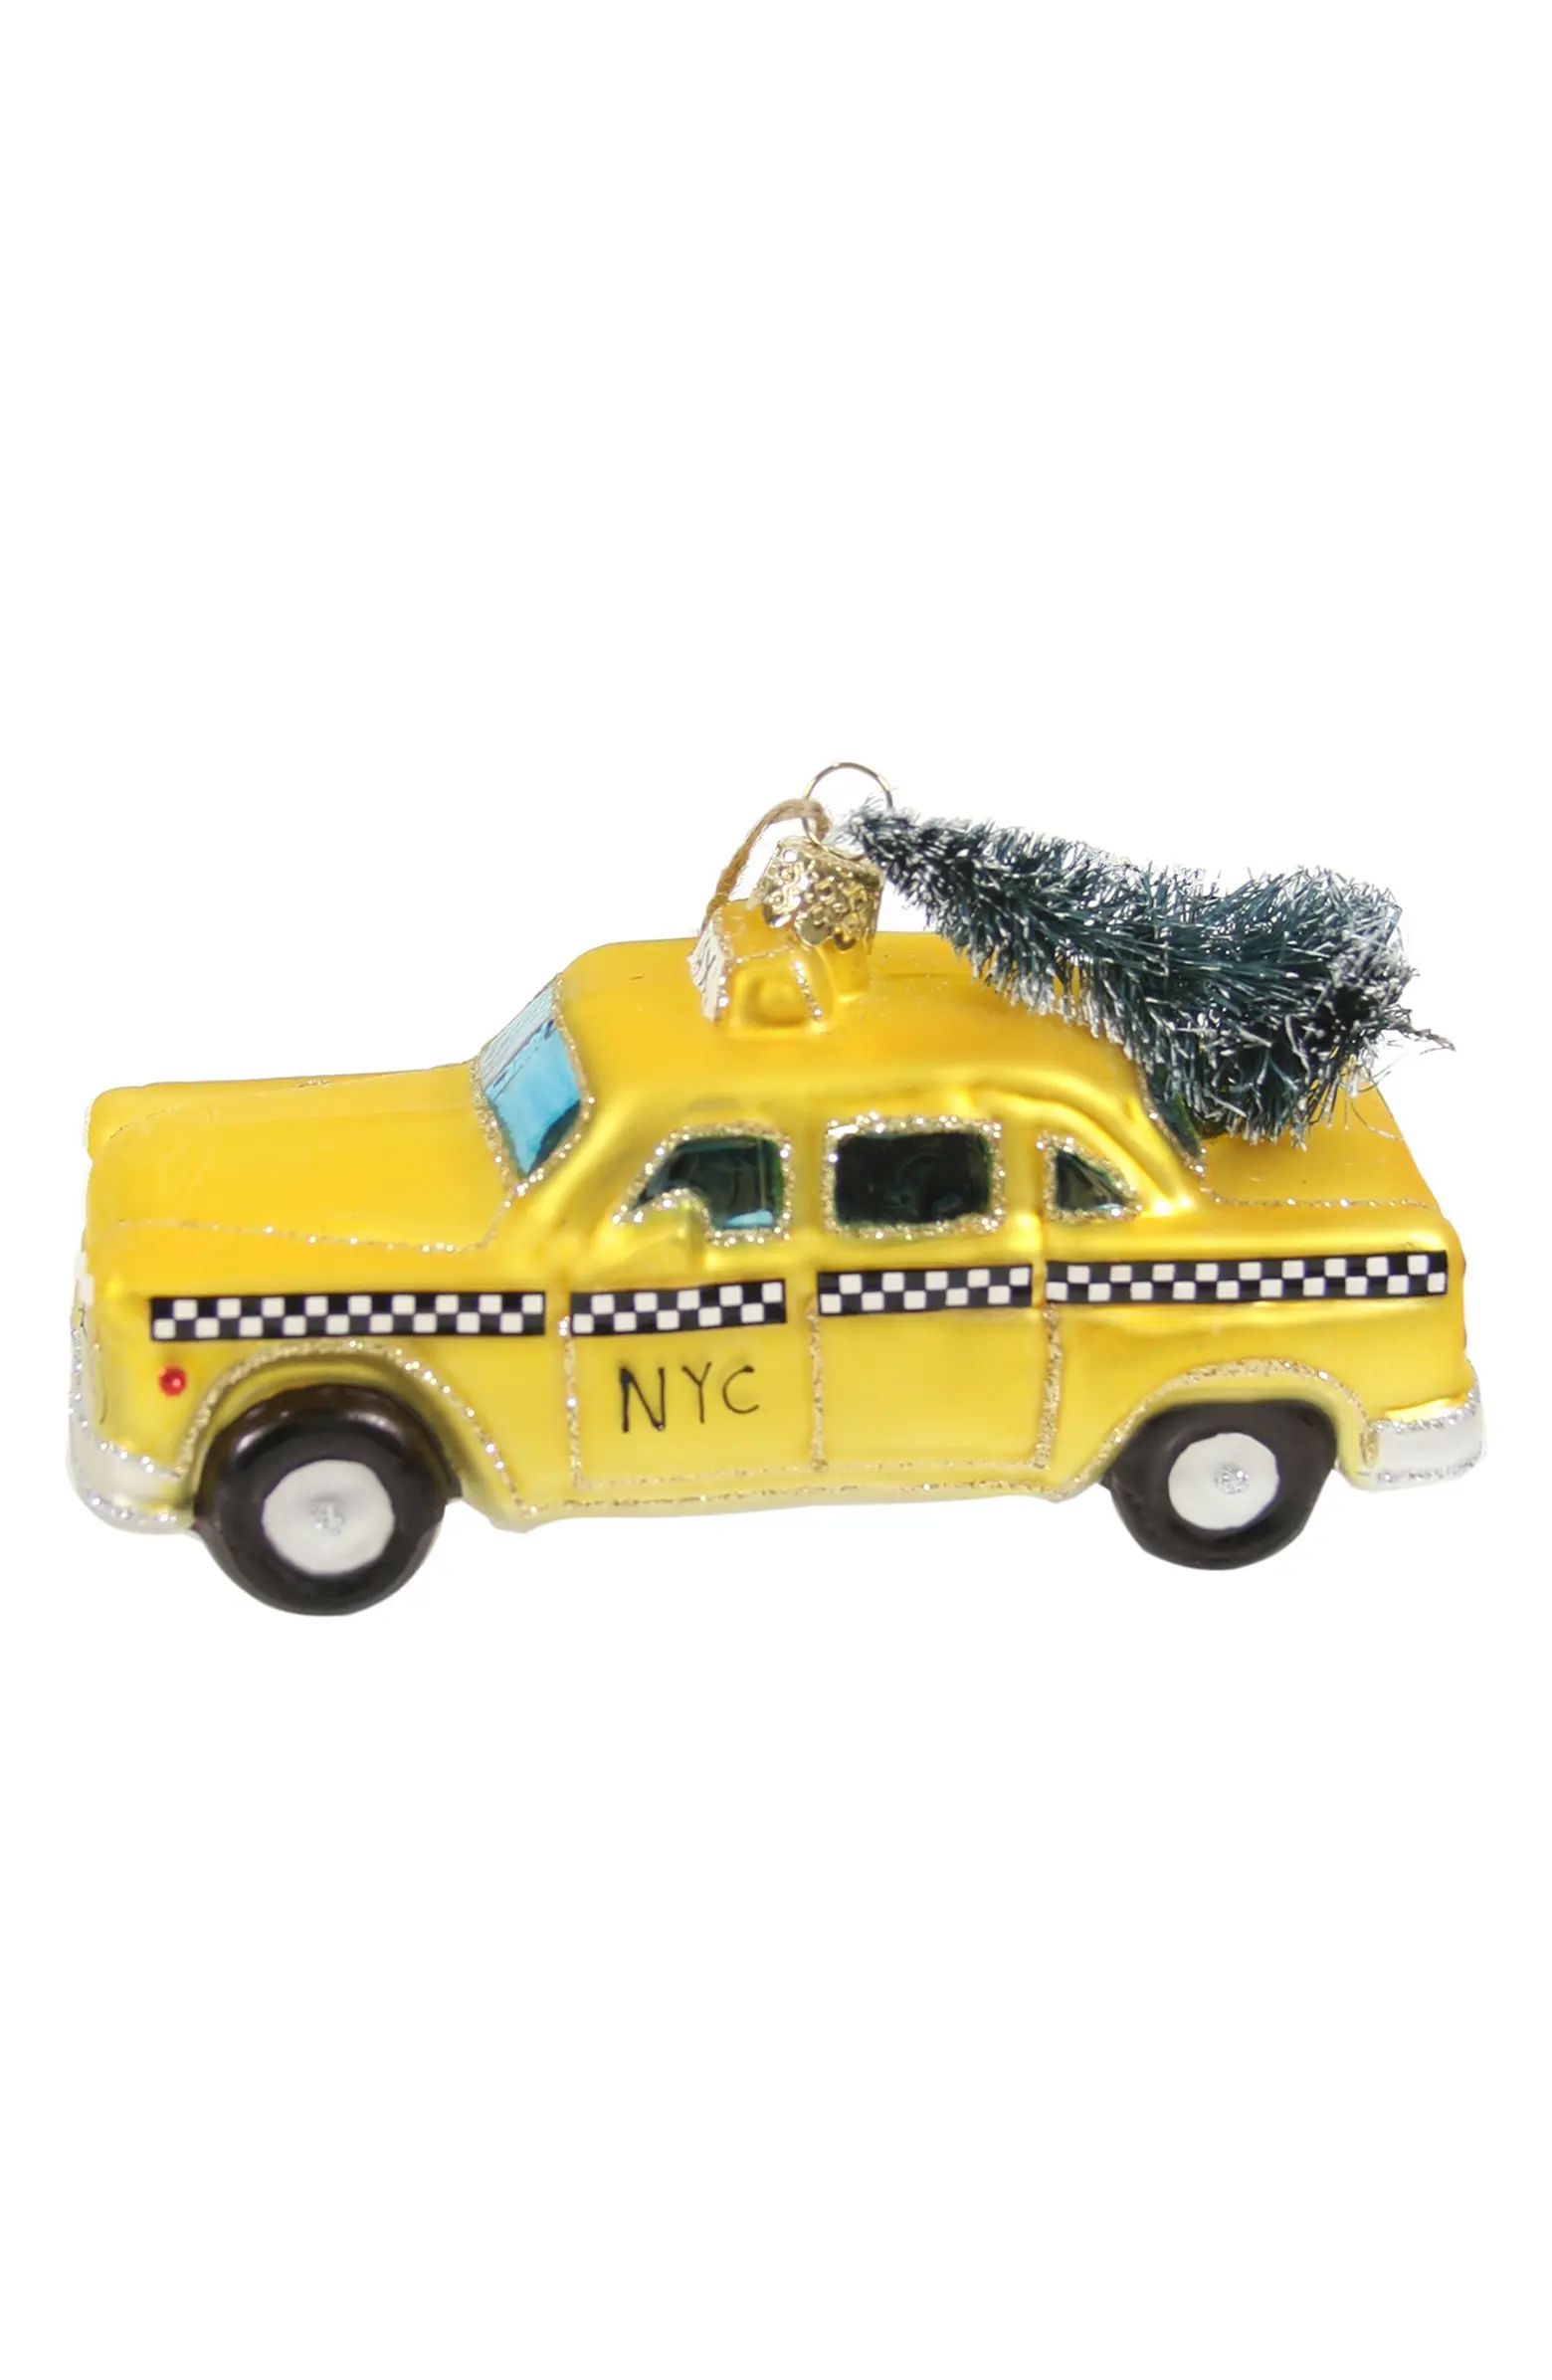 Cody Foster & Co. NYC Taxi Ornament | Nordstrom | Nordstrom